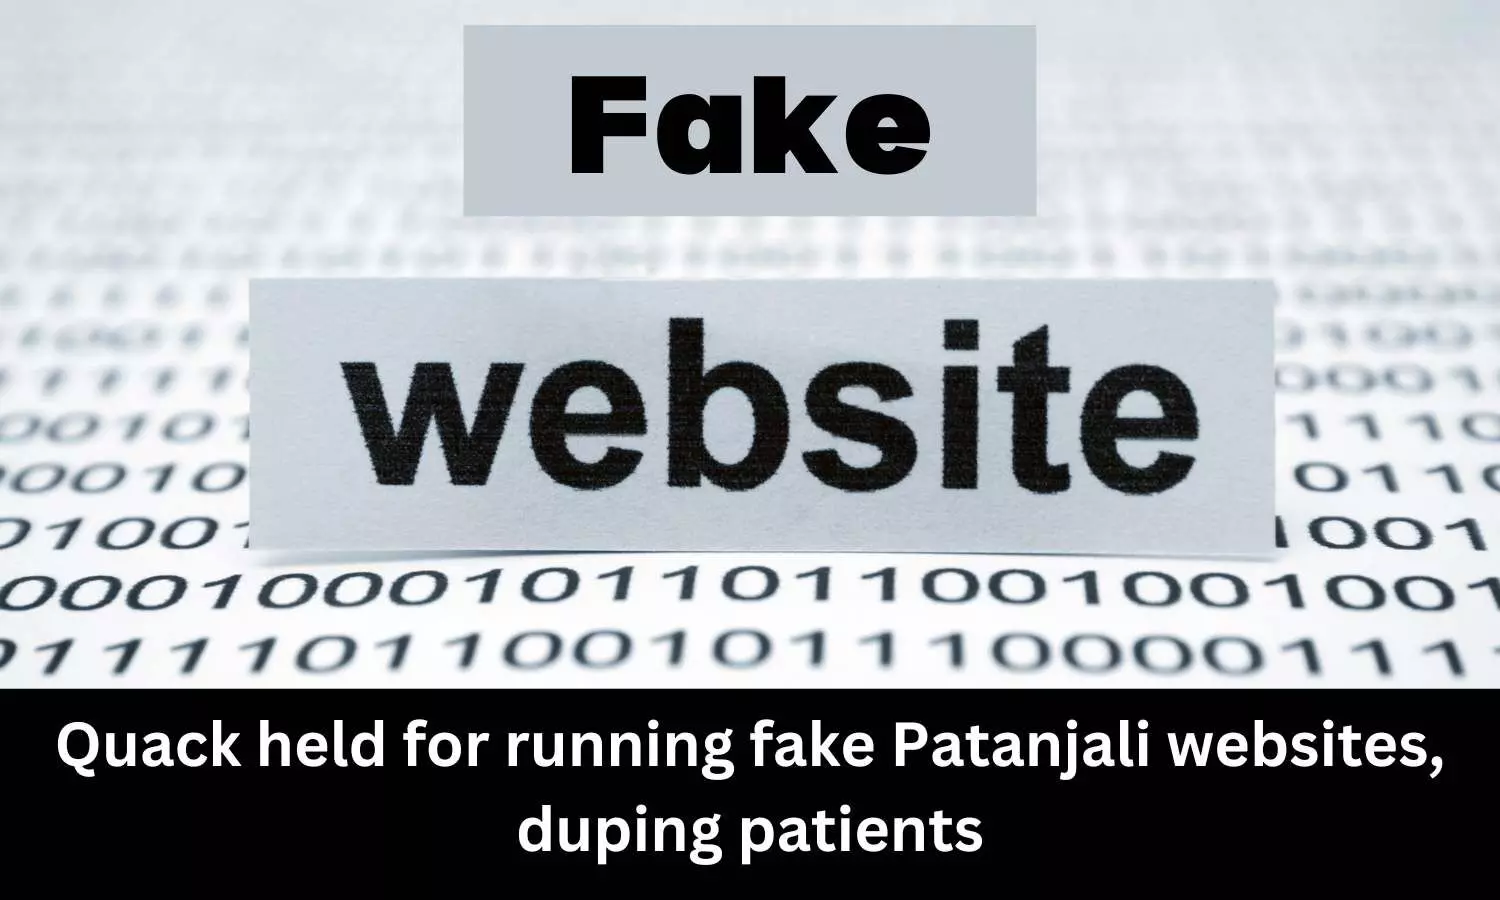 38-year-old arrested for running fake Patanjali websites, duping patients